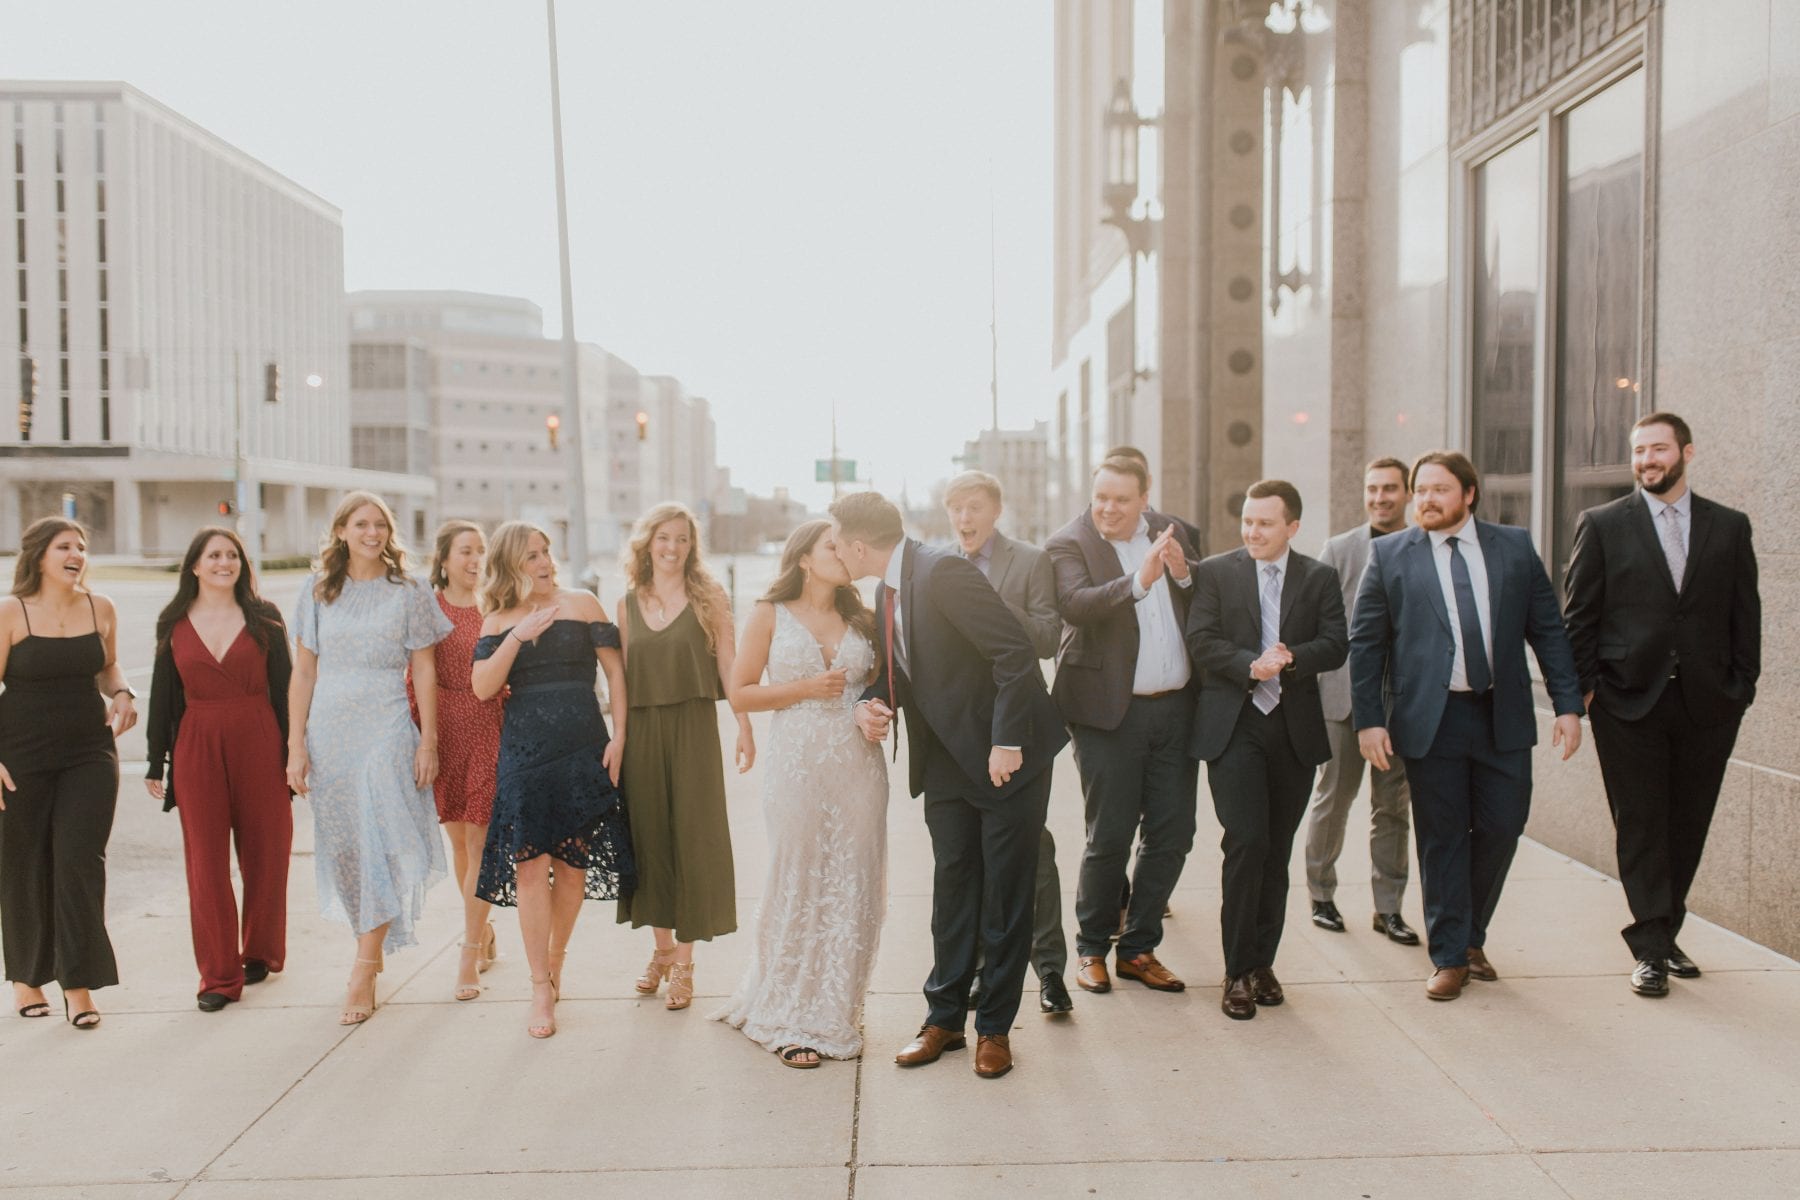 Bride and groom kiss while walking with bridal party